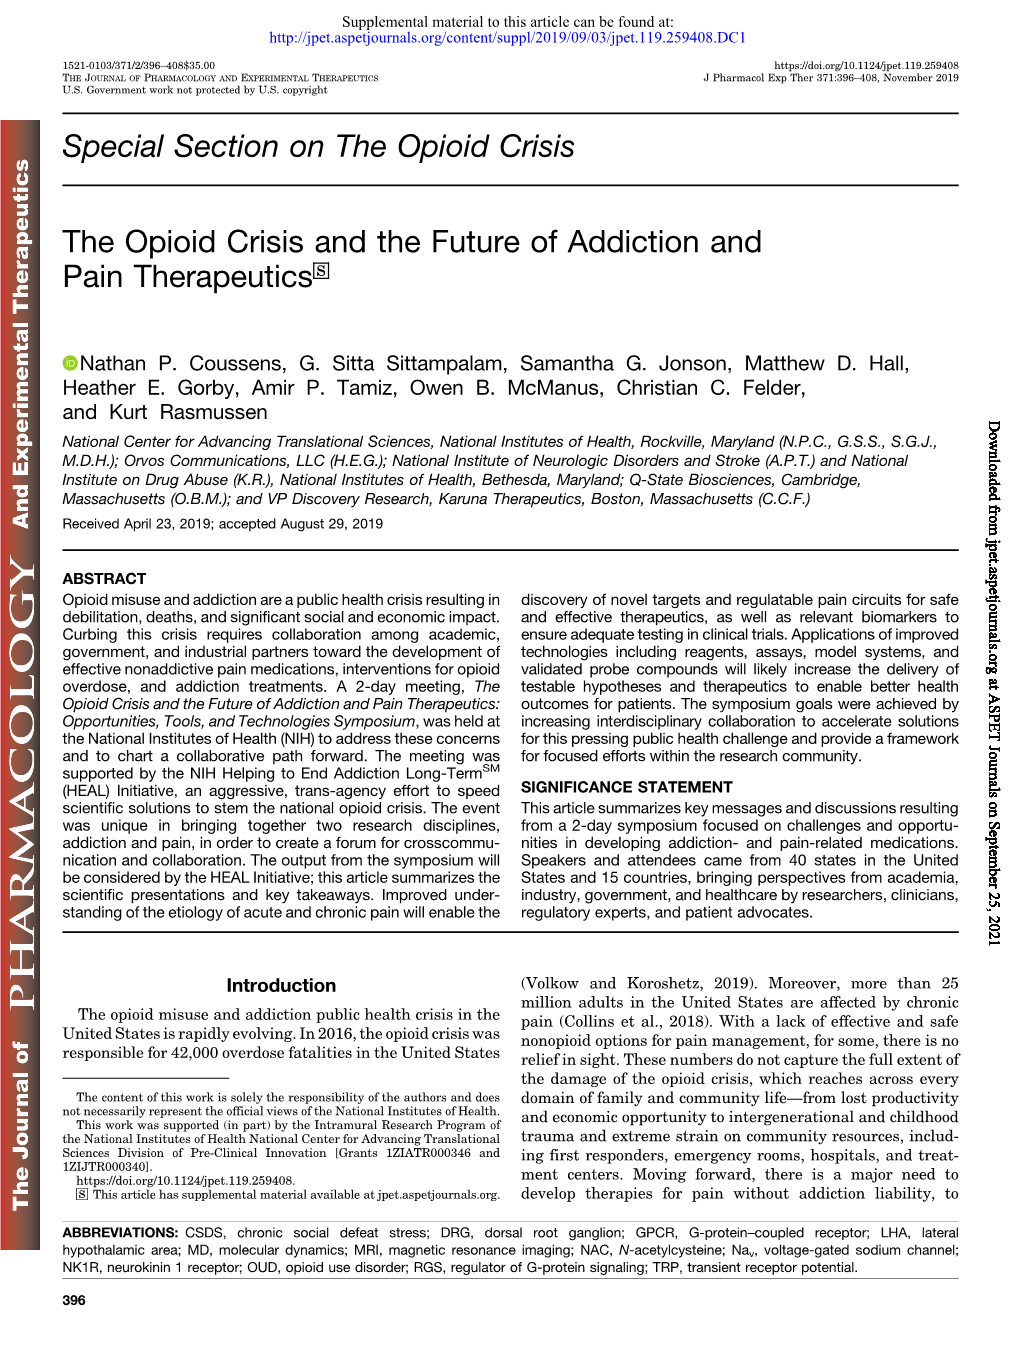 The Opioid Crisis and the Future of Addiction and Pain Therapeutics S